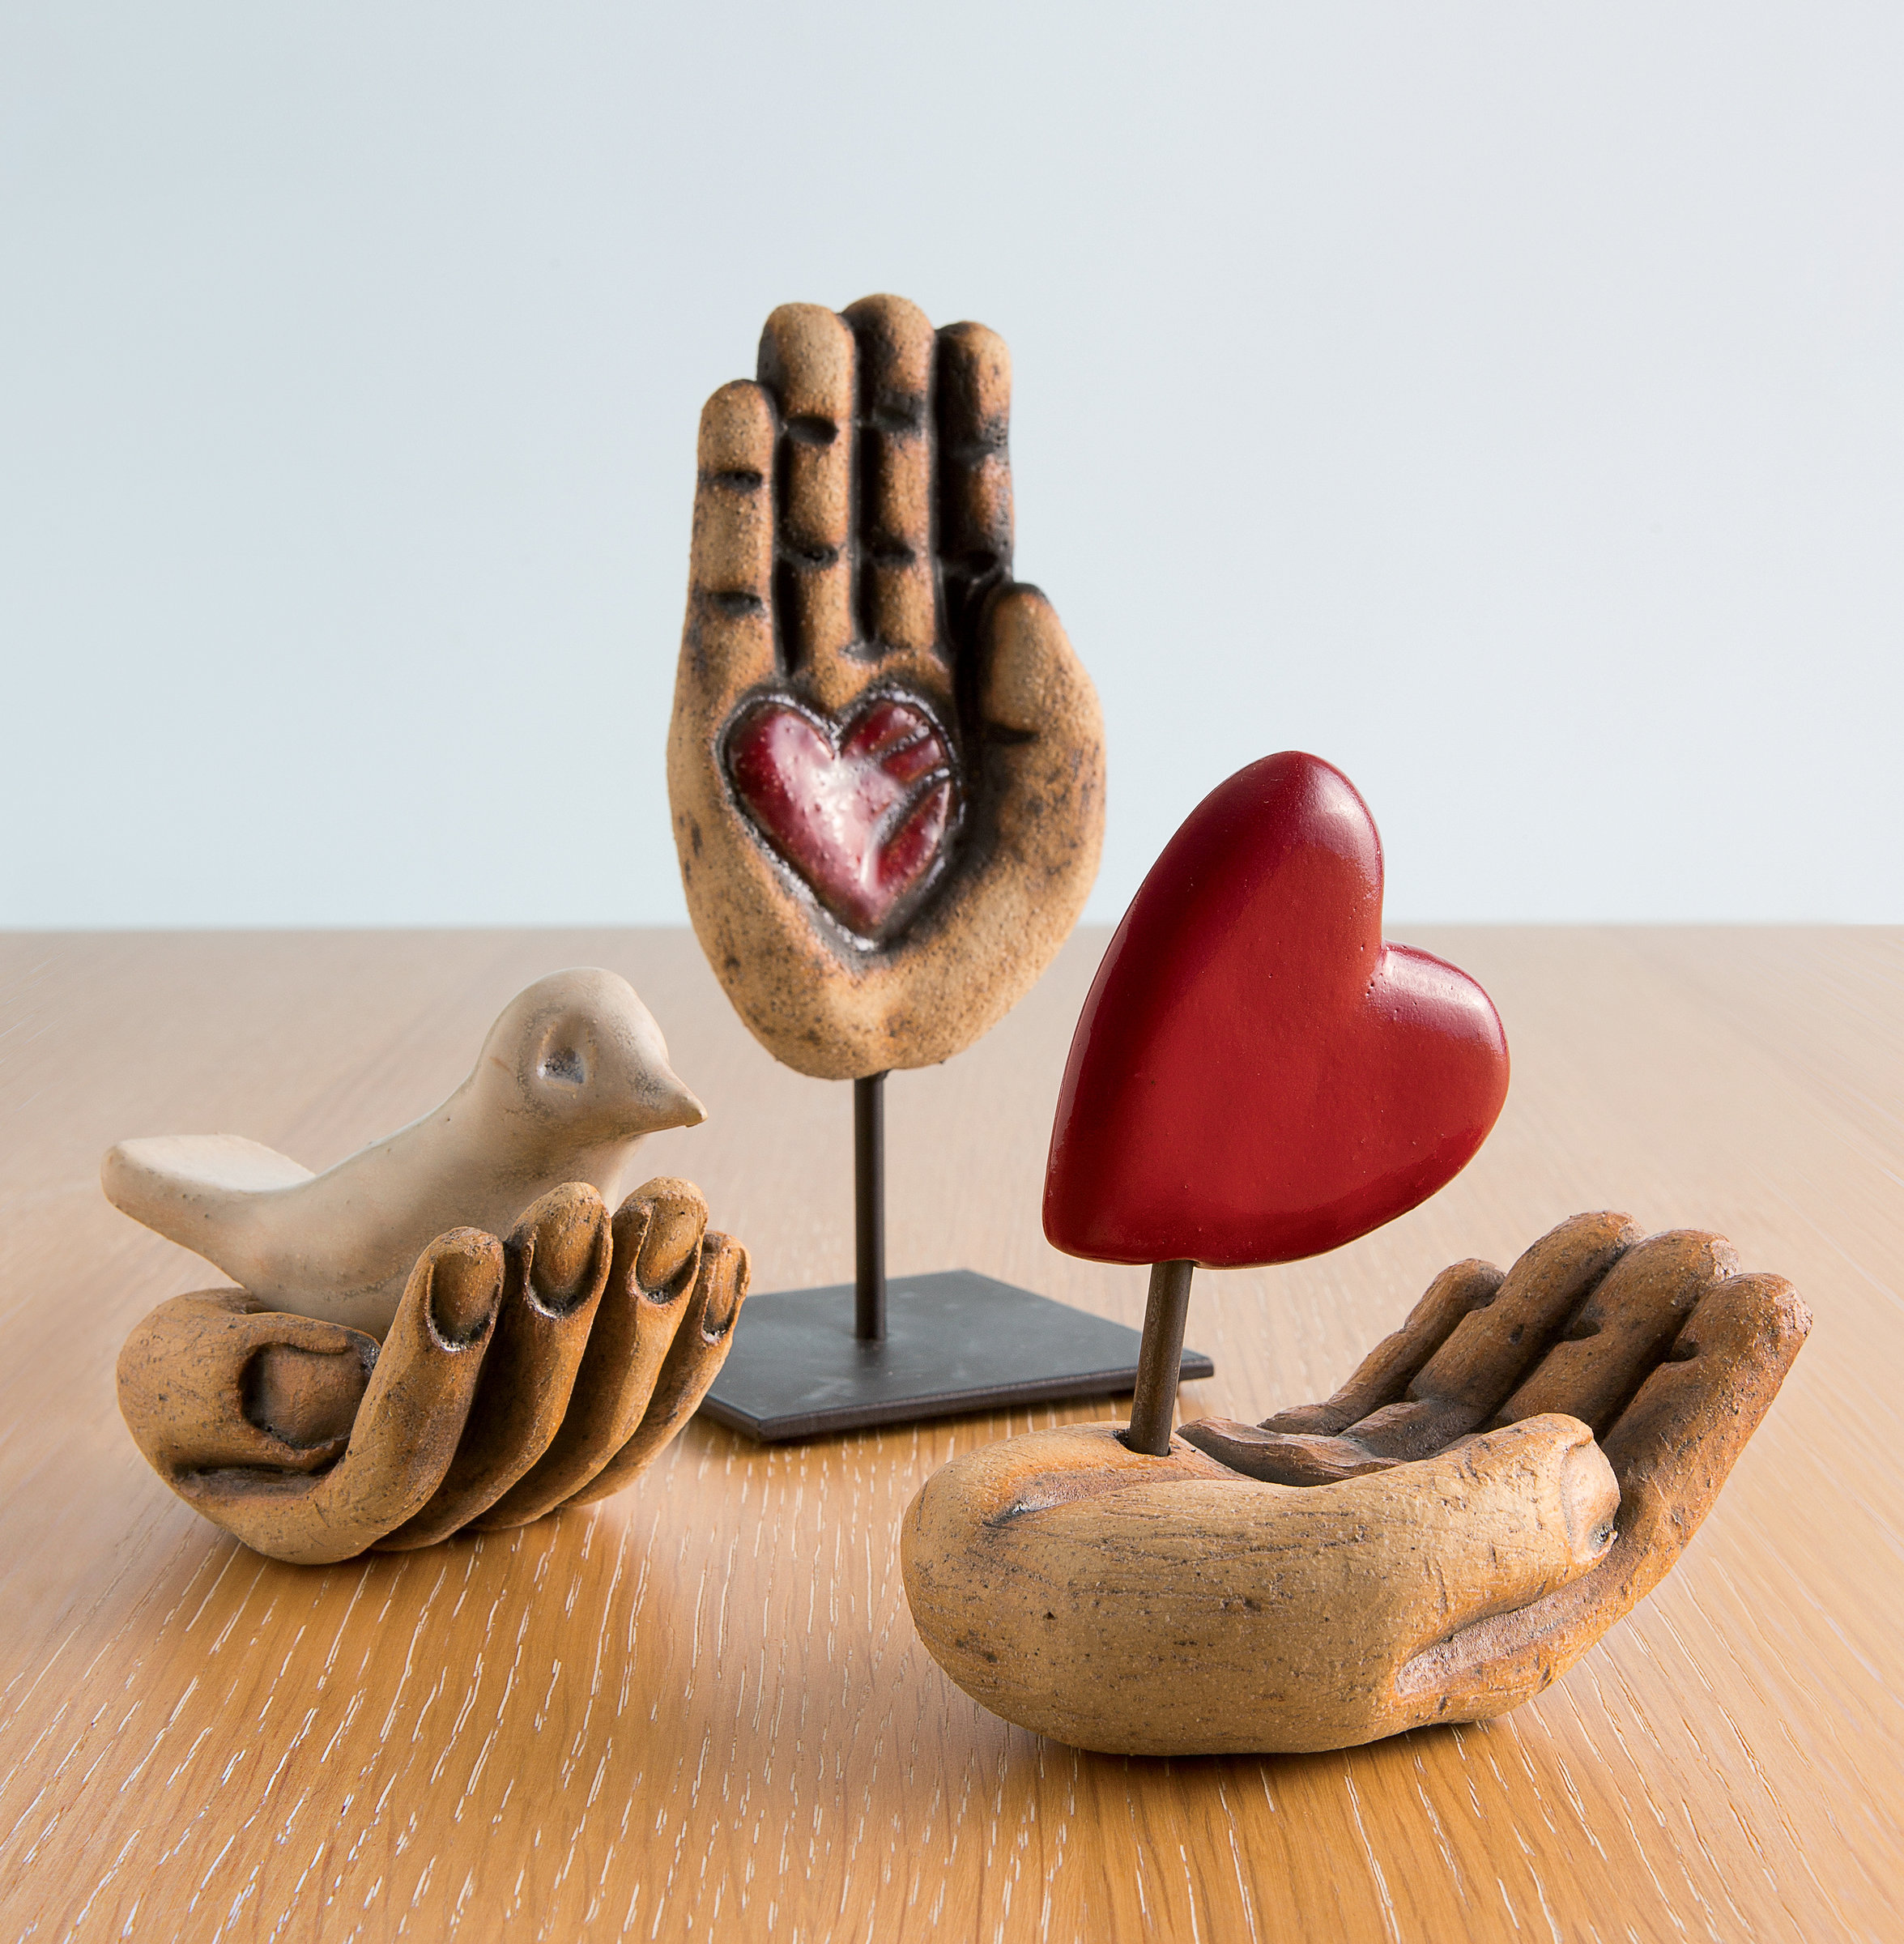 Hand Sculptures by Cathy Broski (Ceramic Sculpture) | Artful Home